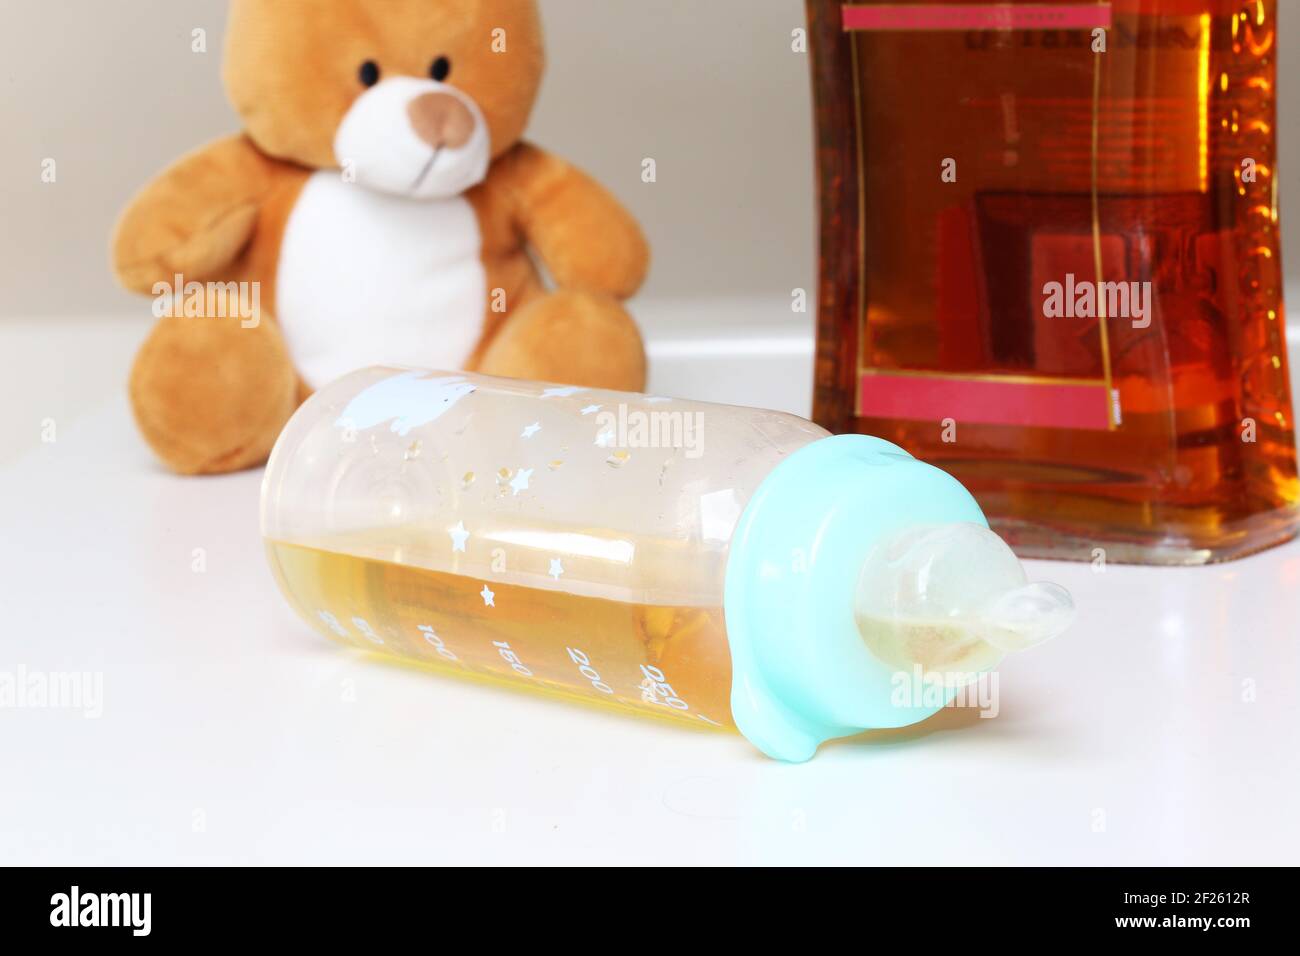 Symbol image of alcohol addiction in parents: cuddly toy, baby bottle and alcohol Stock Photo